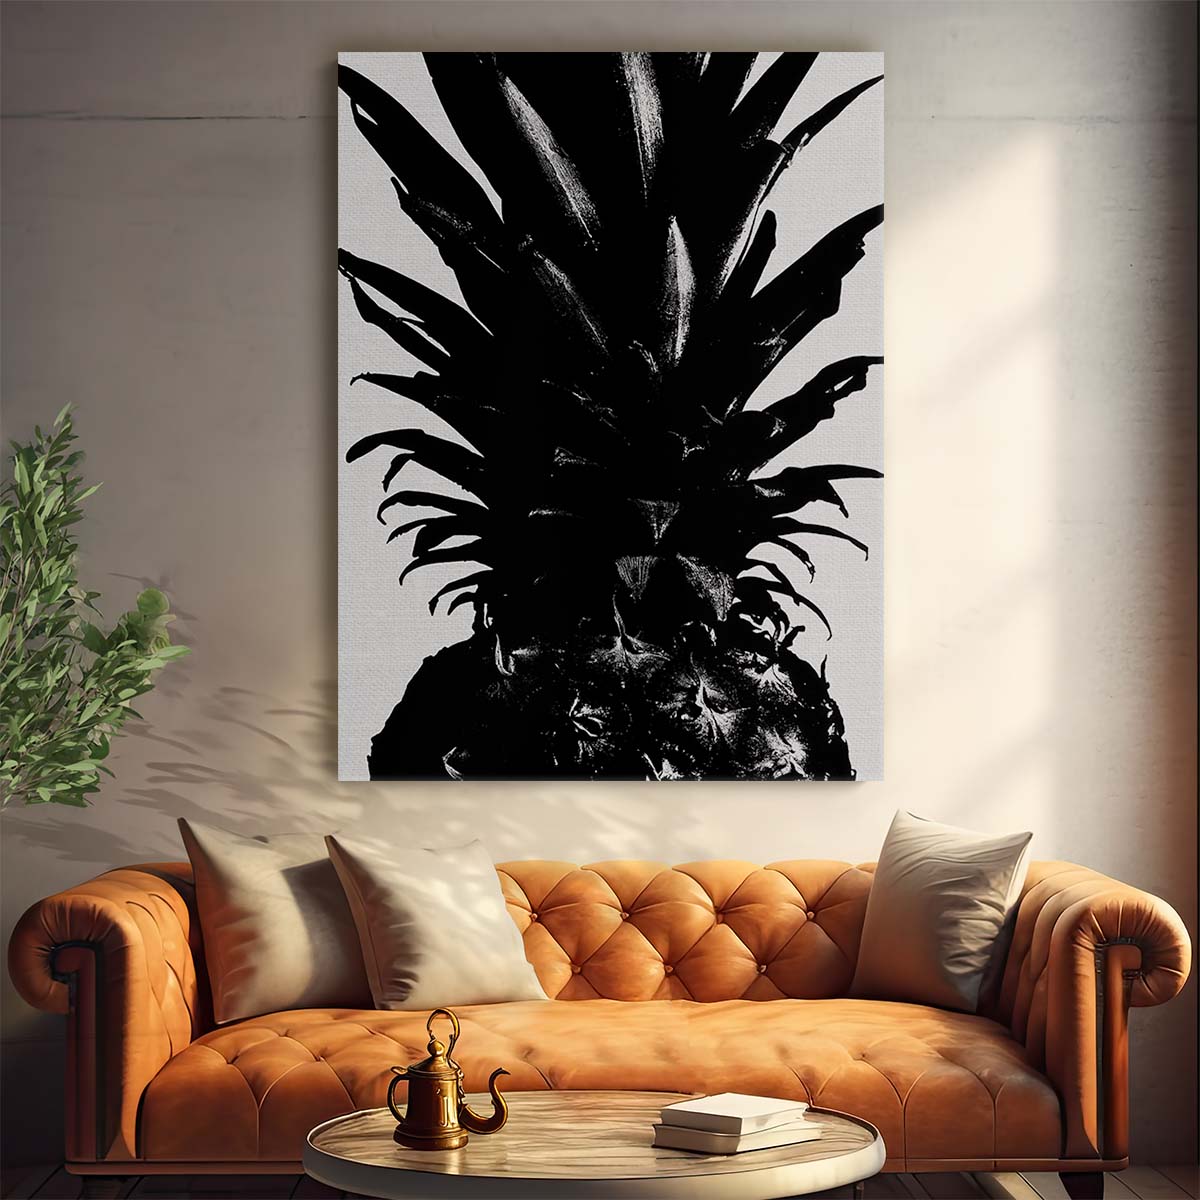 Minimalistic Black & White Pineapple Still Life Photography Art by Luxuriance Designs, made in USA